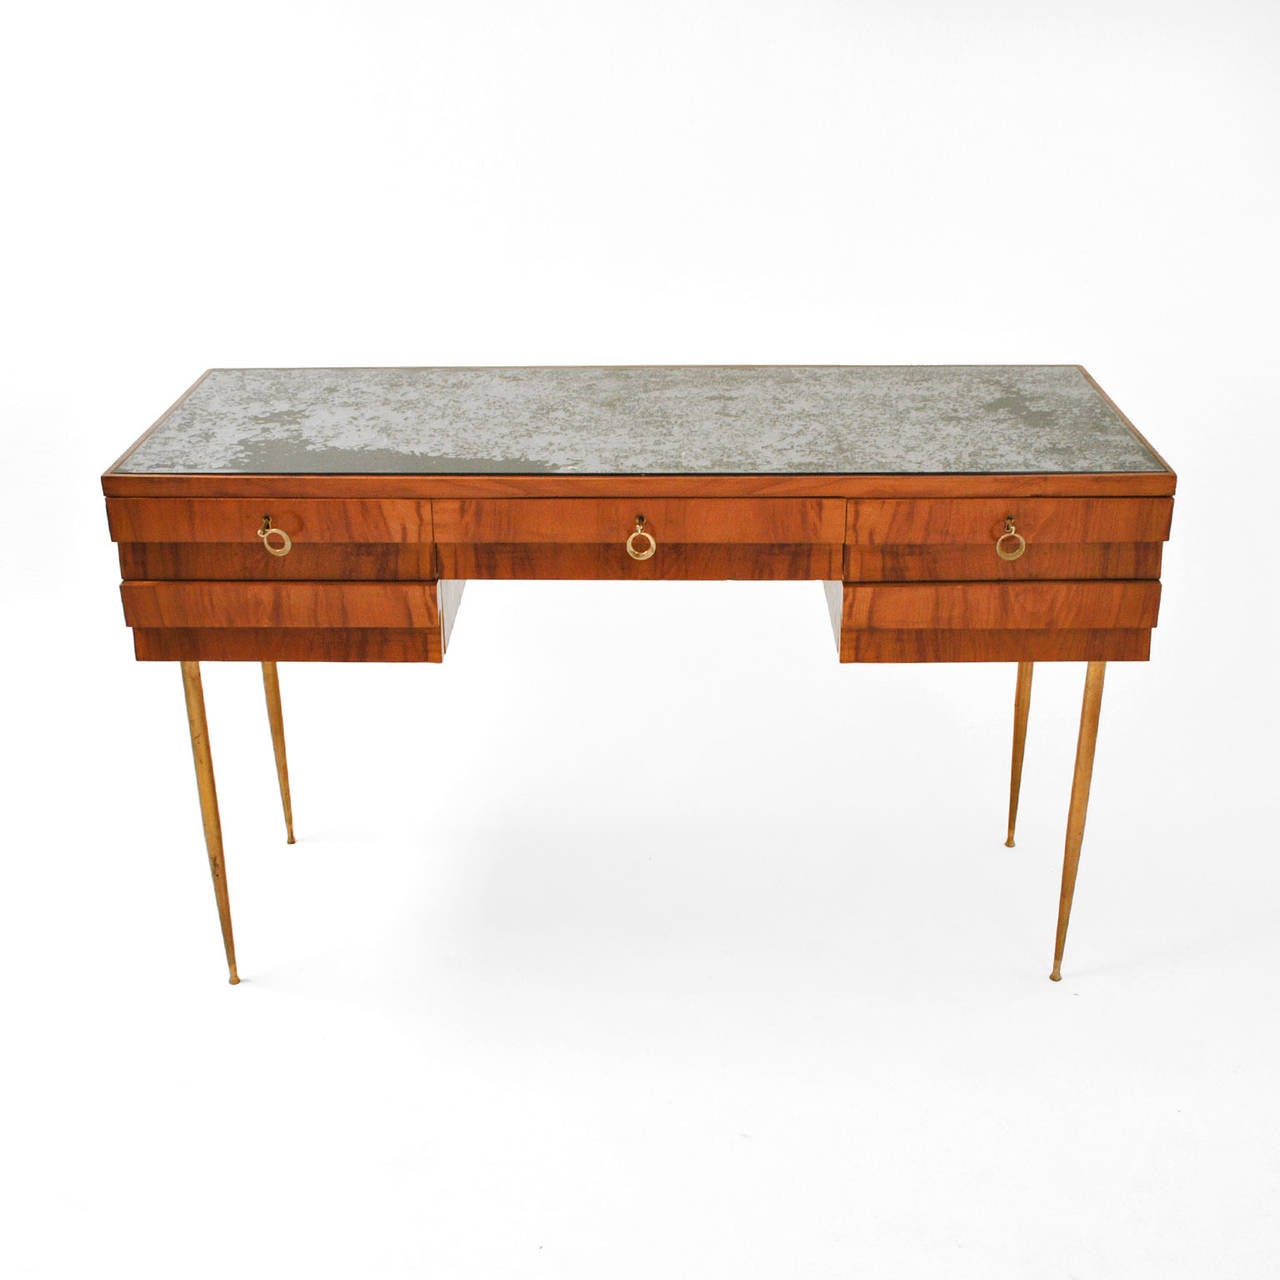 Console/ boudoir made in solid wood made in post-cubist form at frontal. Composed by five drawers and legged in brass in needle form and crackle black crystal on top.